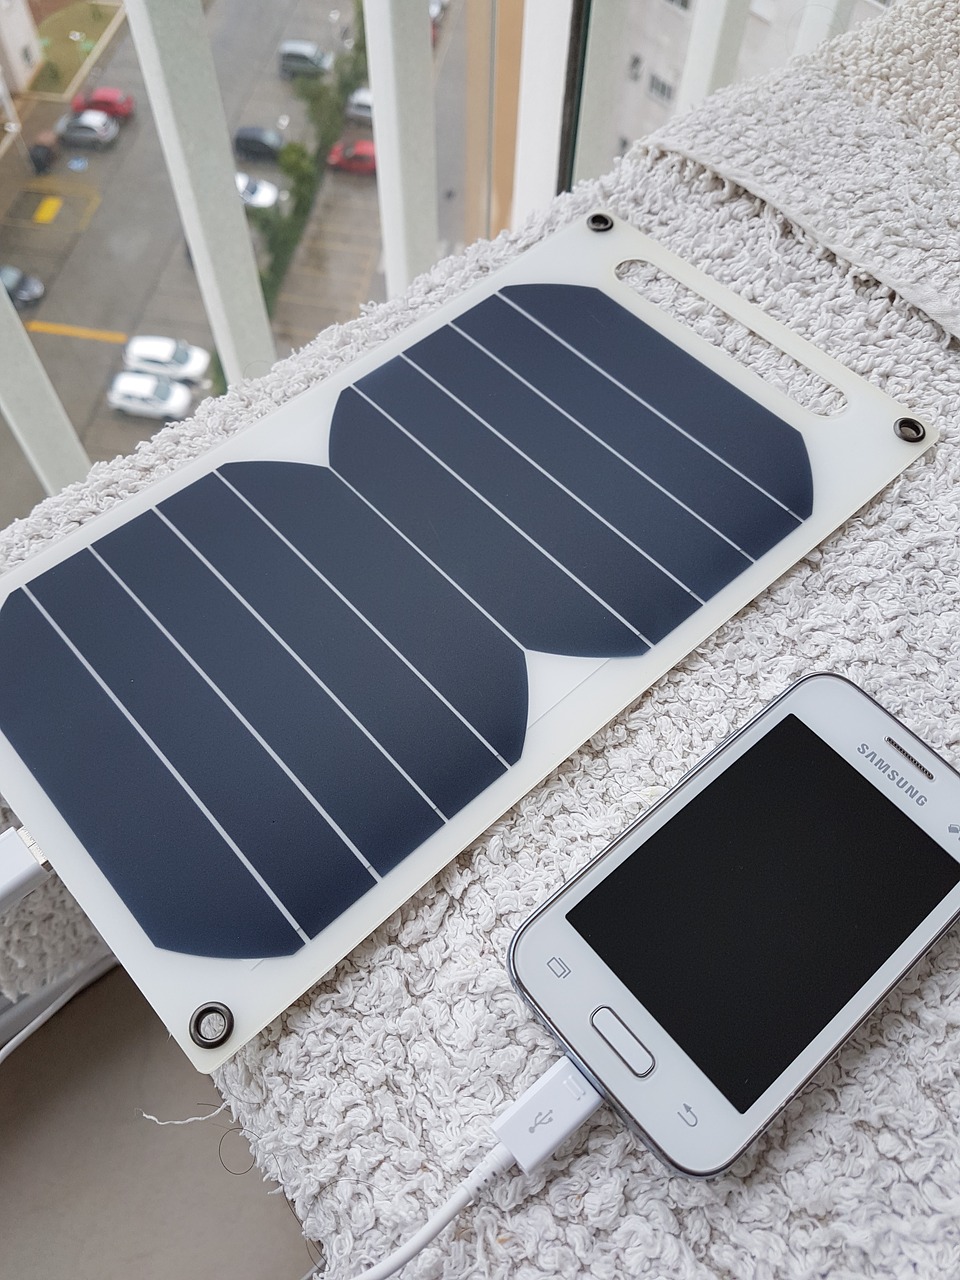 Smart Solar Box Review (By an Electrical Engineer) - Bills Wiz